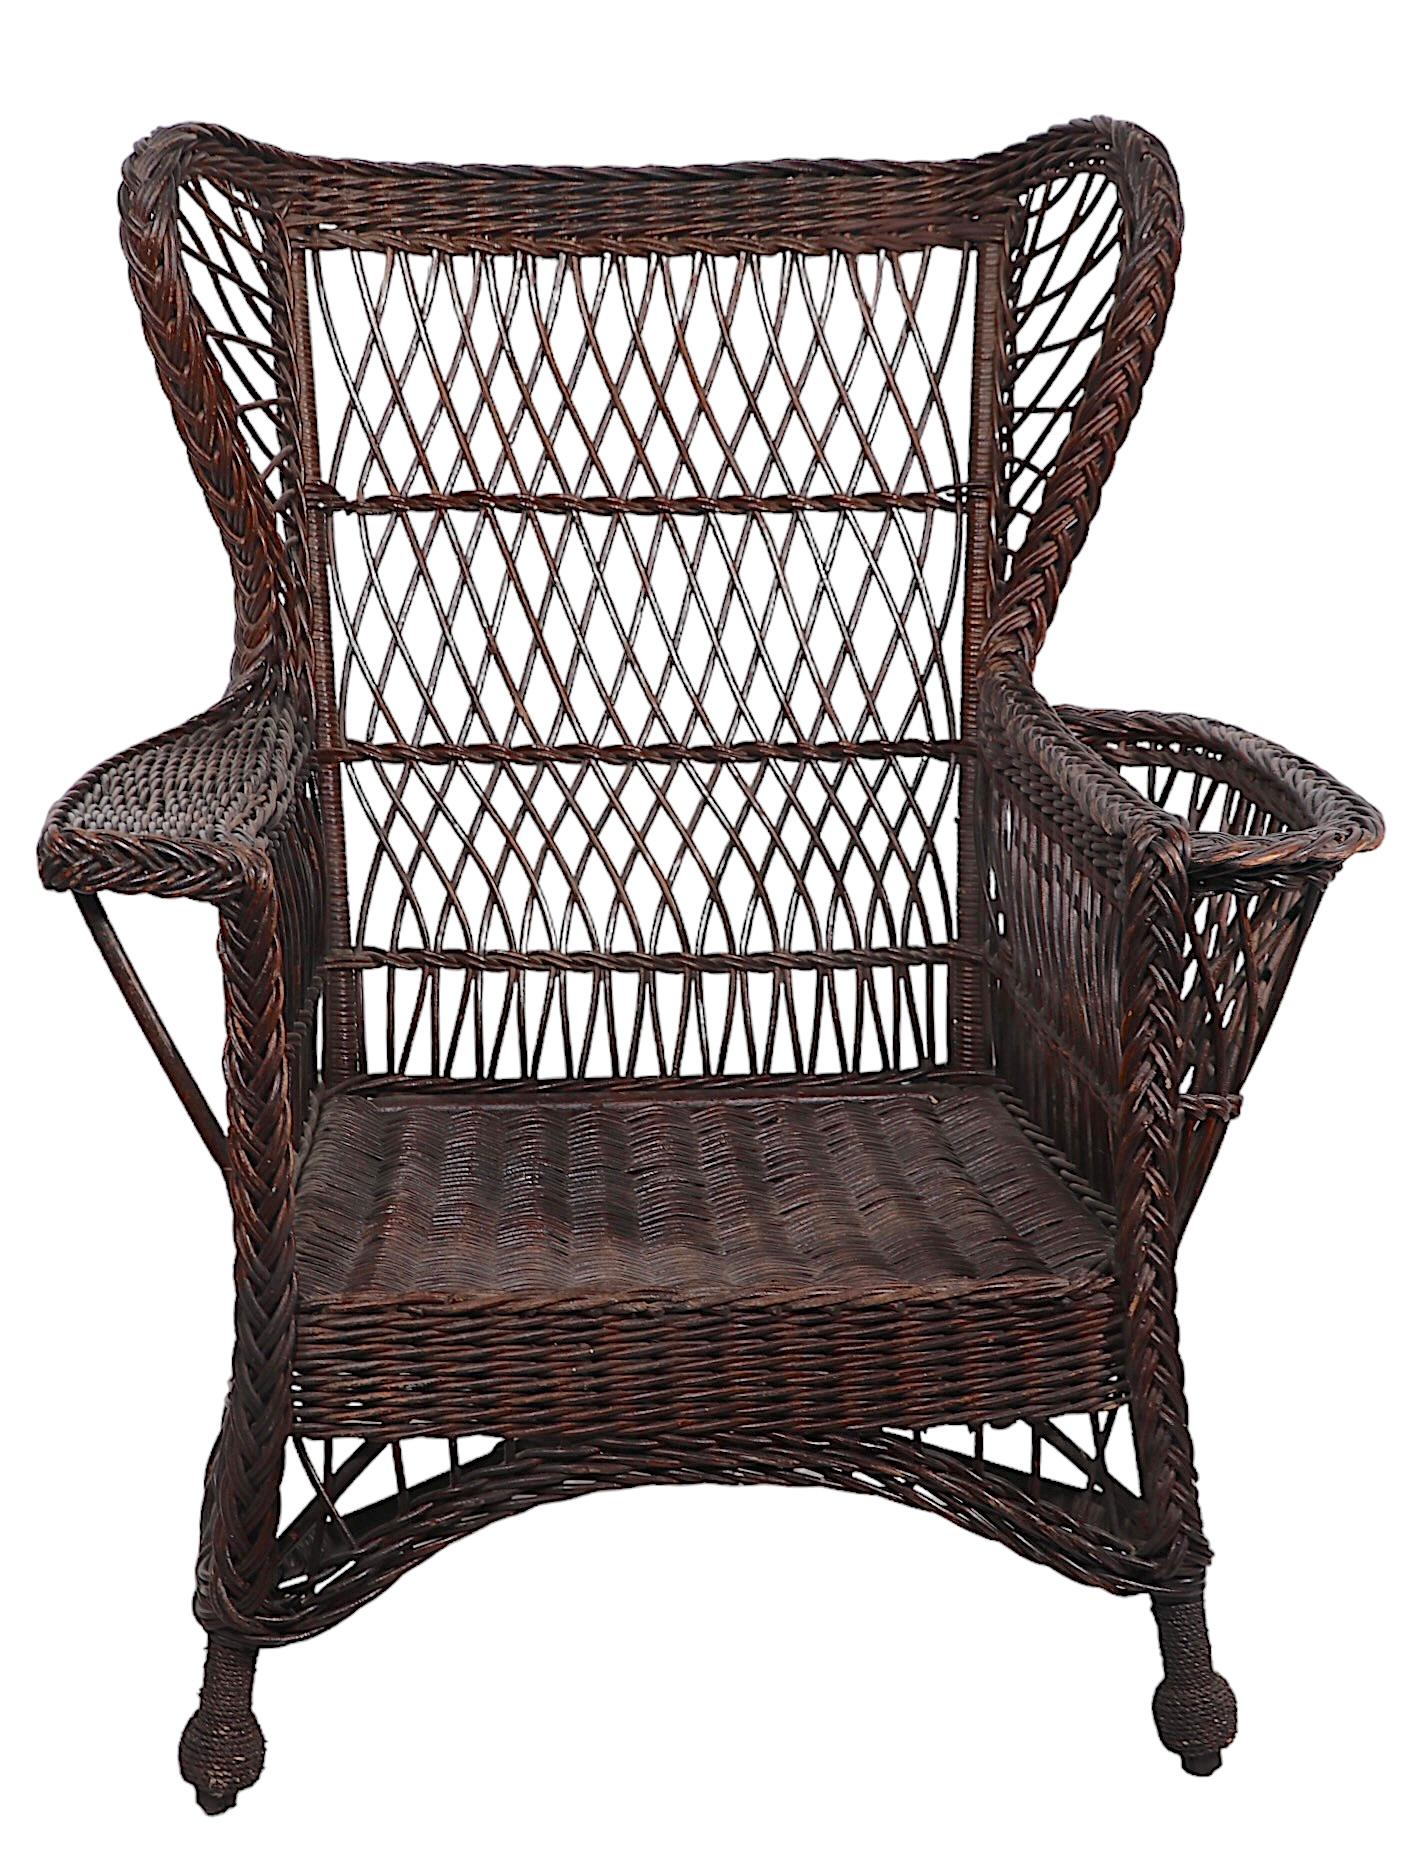 Victorian Bar Harbor Wicker Wing Chair with Magazine Rack Arm For Sale 7